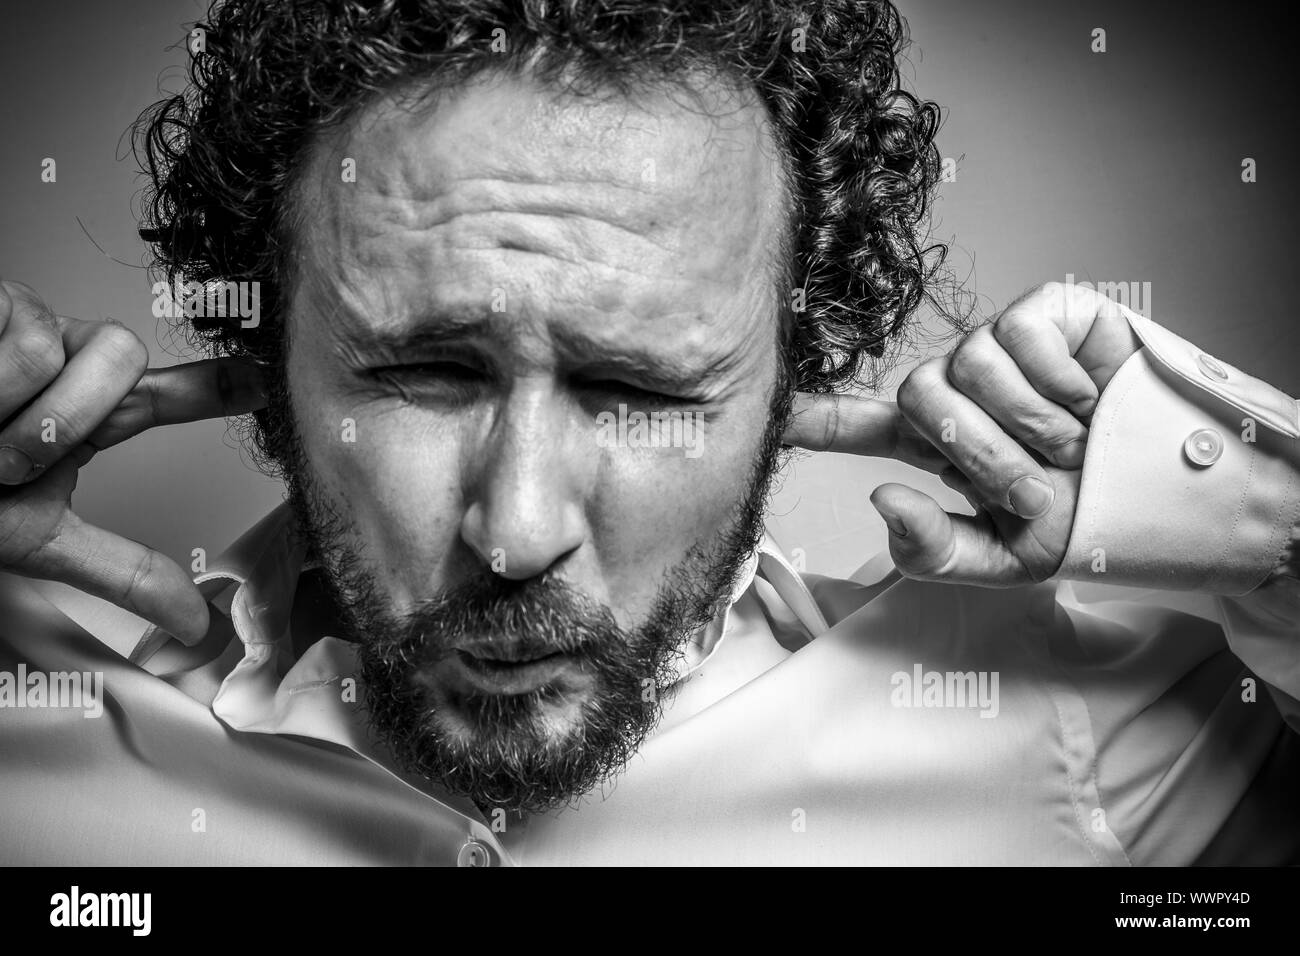 I do not want to hear anything, man with intense expression, white shirt Stock Photo